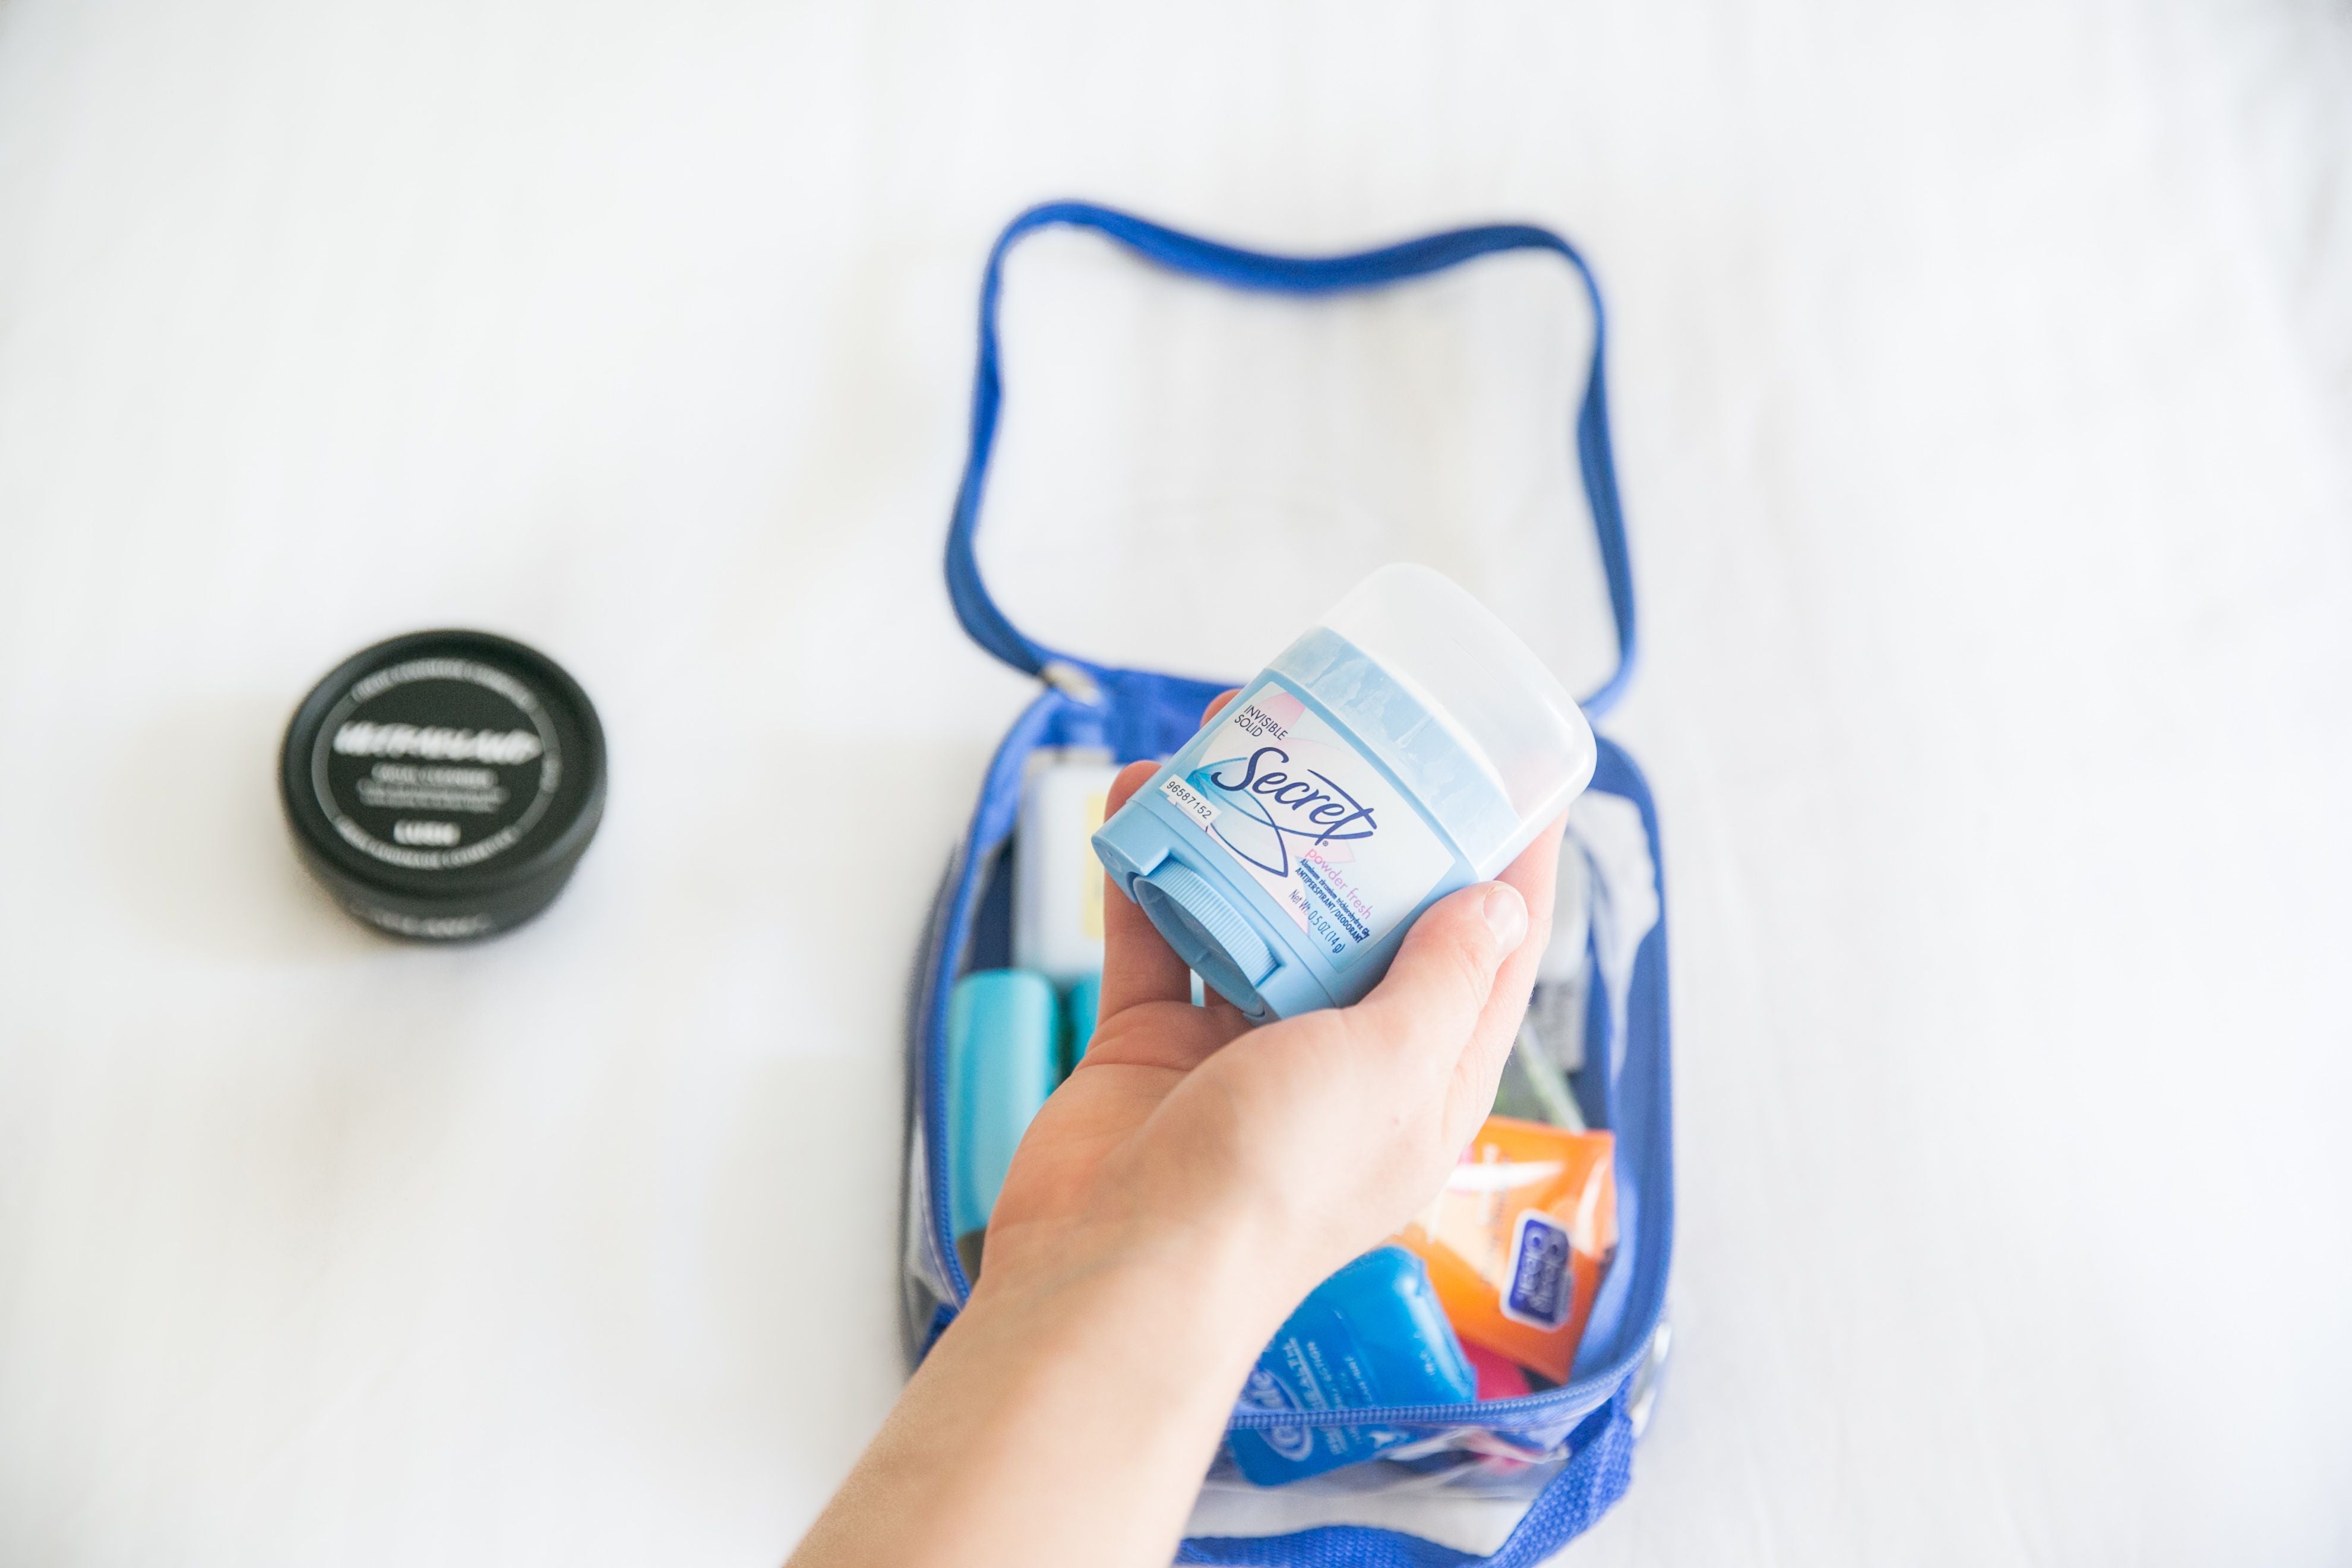 deodorant and other toiletries in an extra small cube